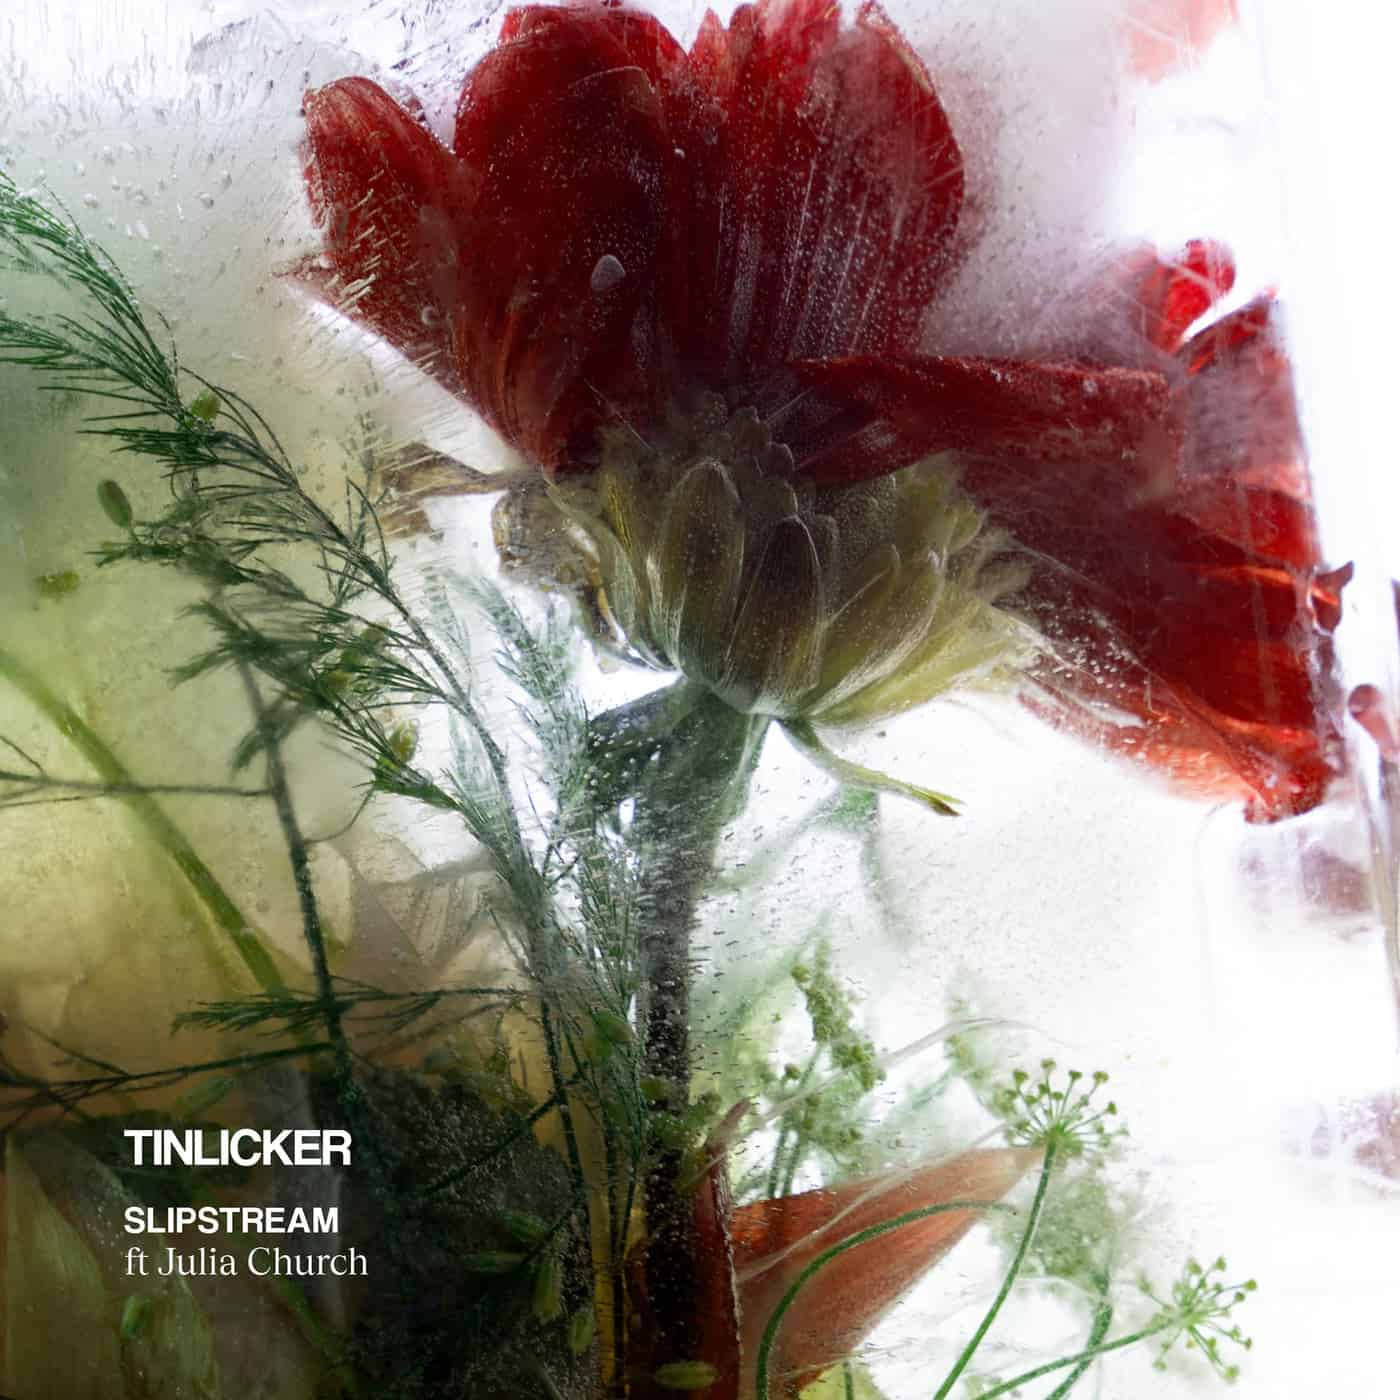 image cover: Slipstream (feat. Julia Church) by Tinlicker, Julia Church on [PIAS] ÉLECTRONIQUE